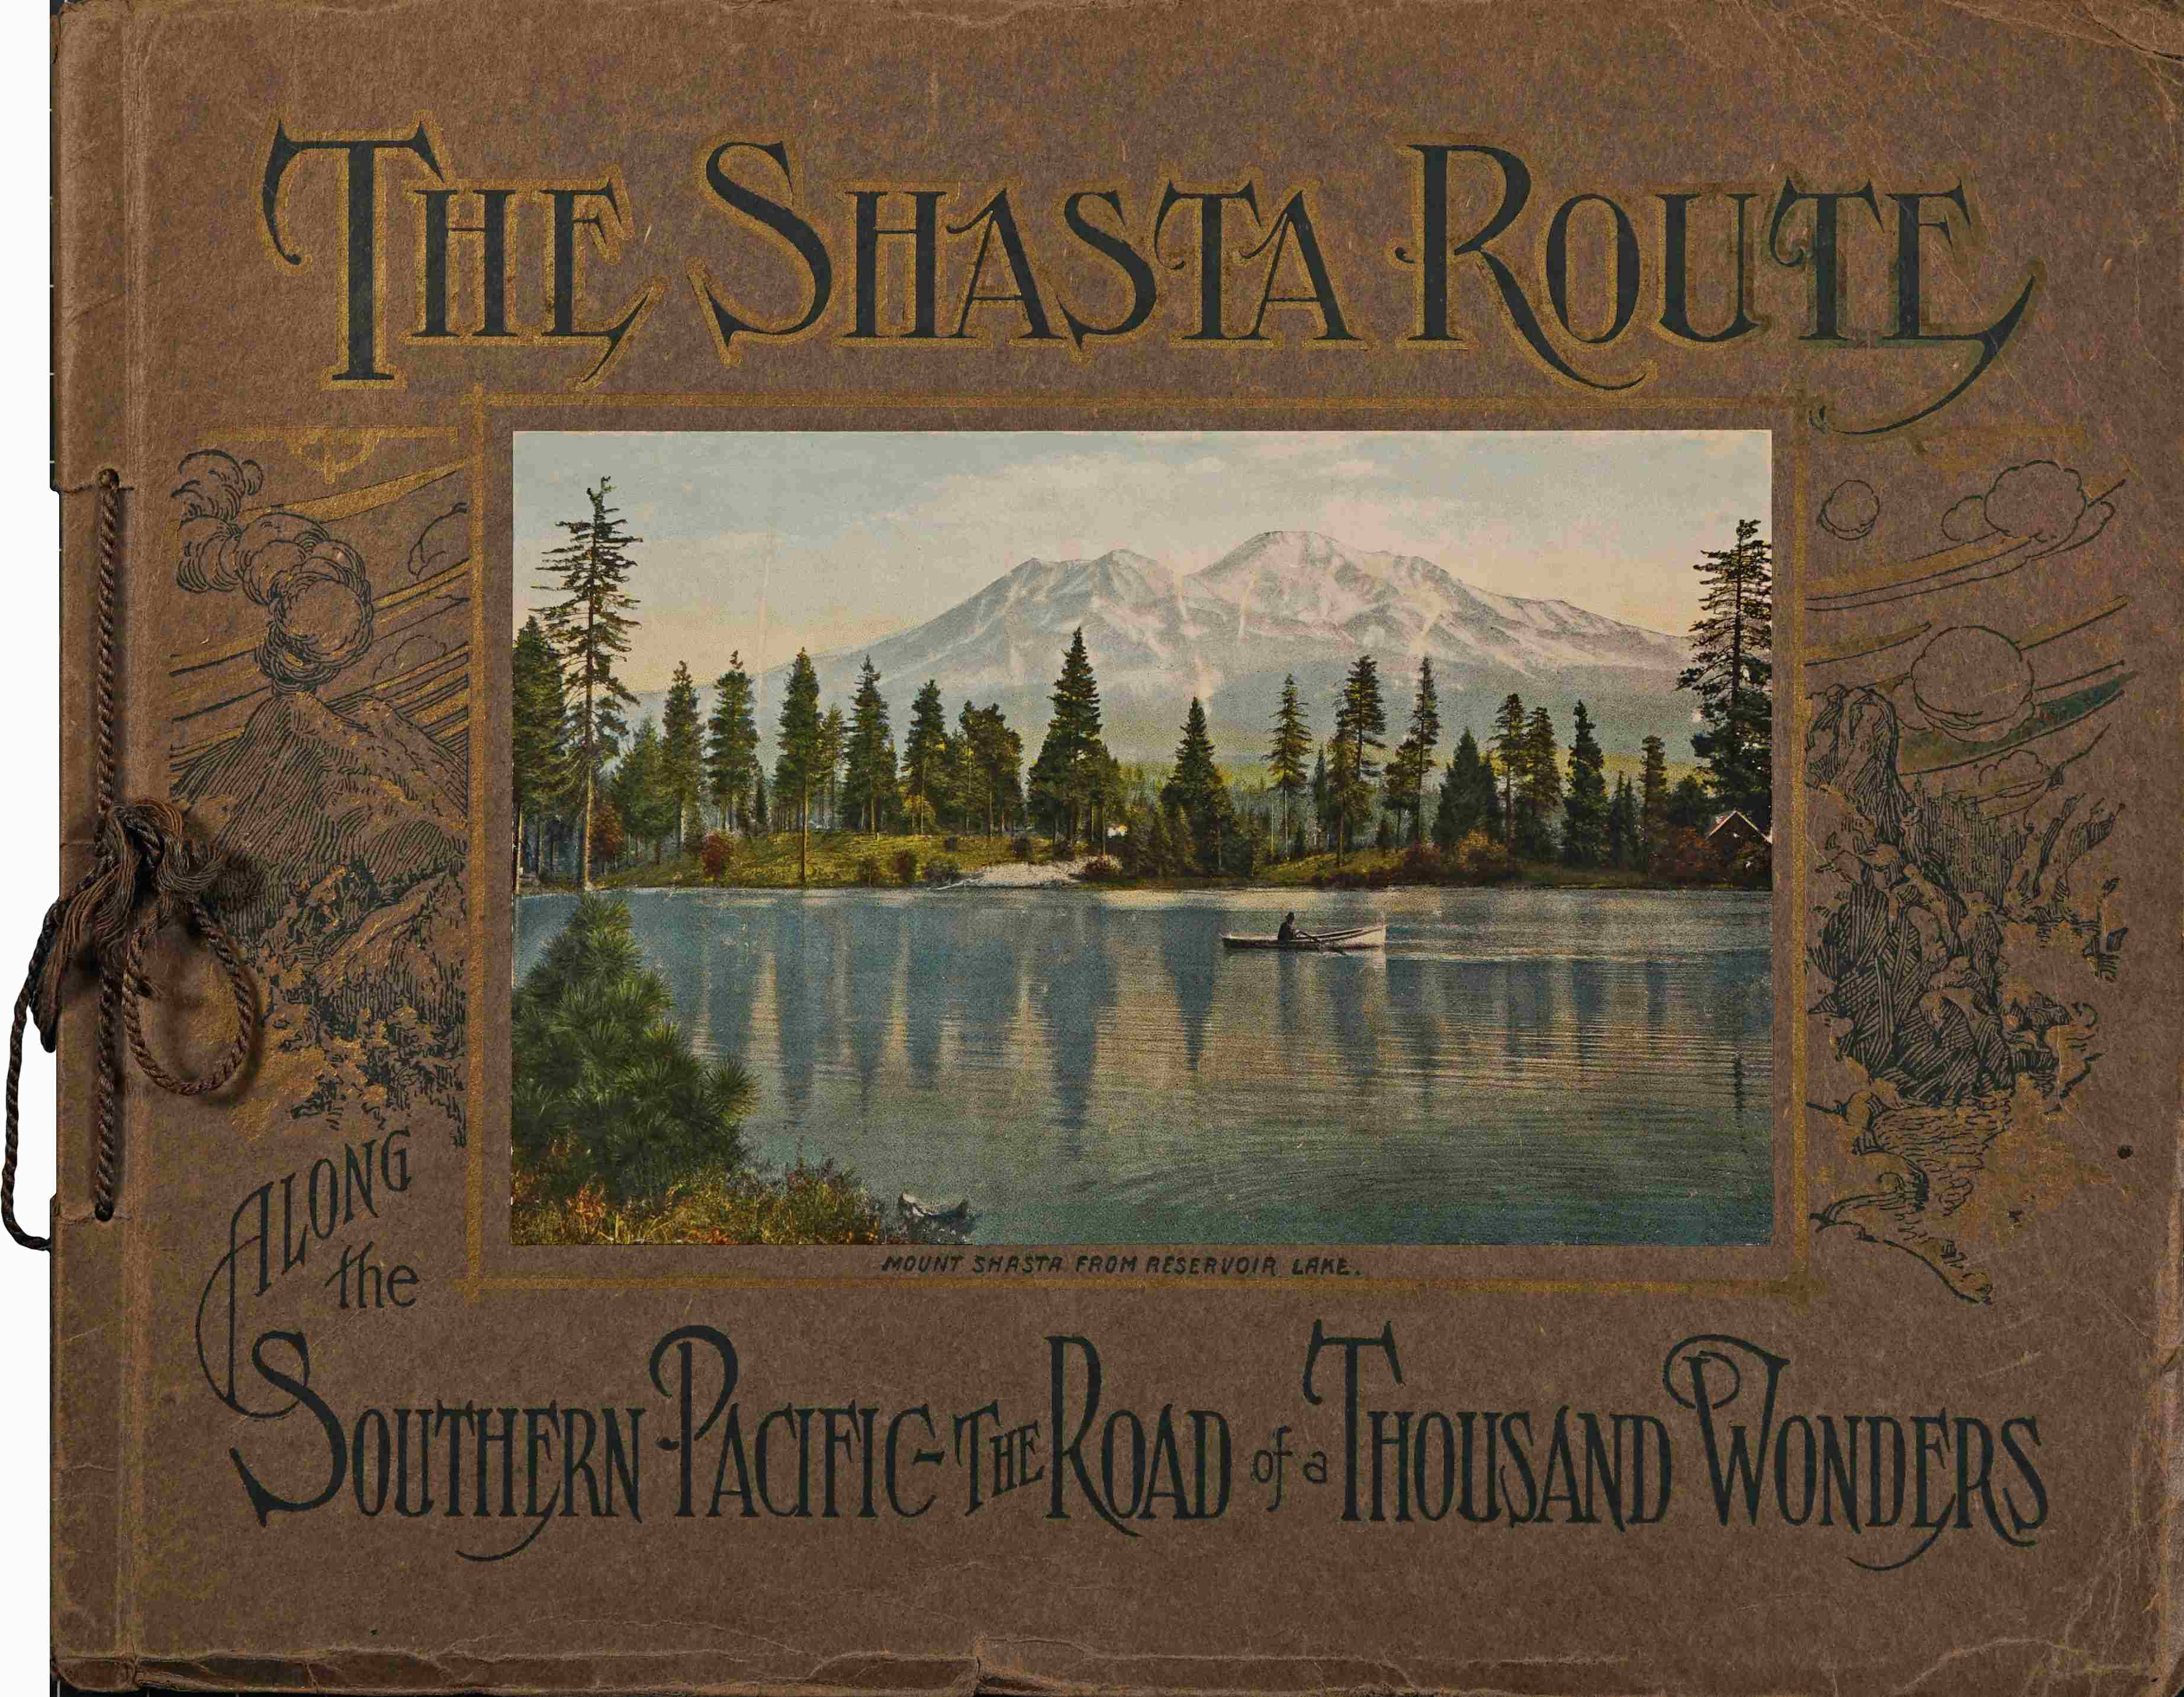 The Shasta route in all of its grandeur&#10;A scenic guide book from San Francisco, California, to Portland, Oregon on the road of a thousand wonders